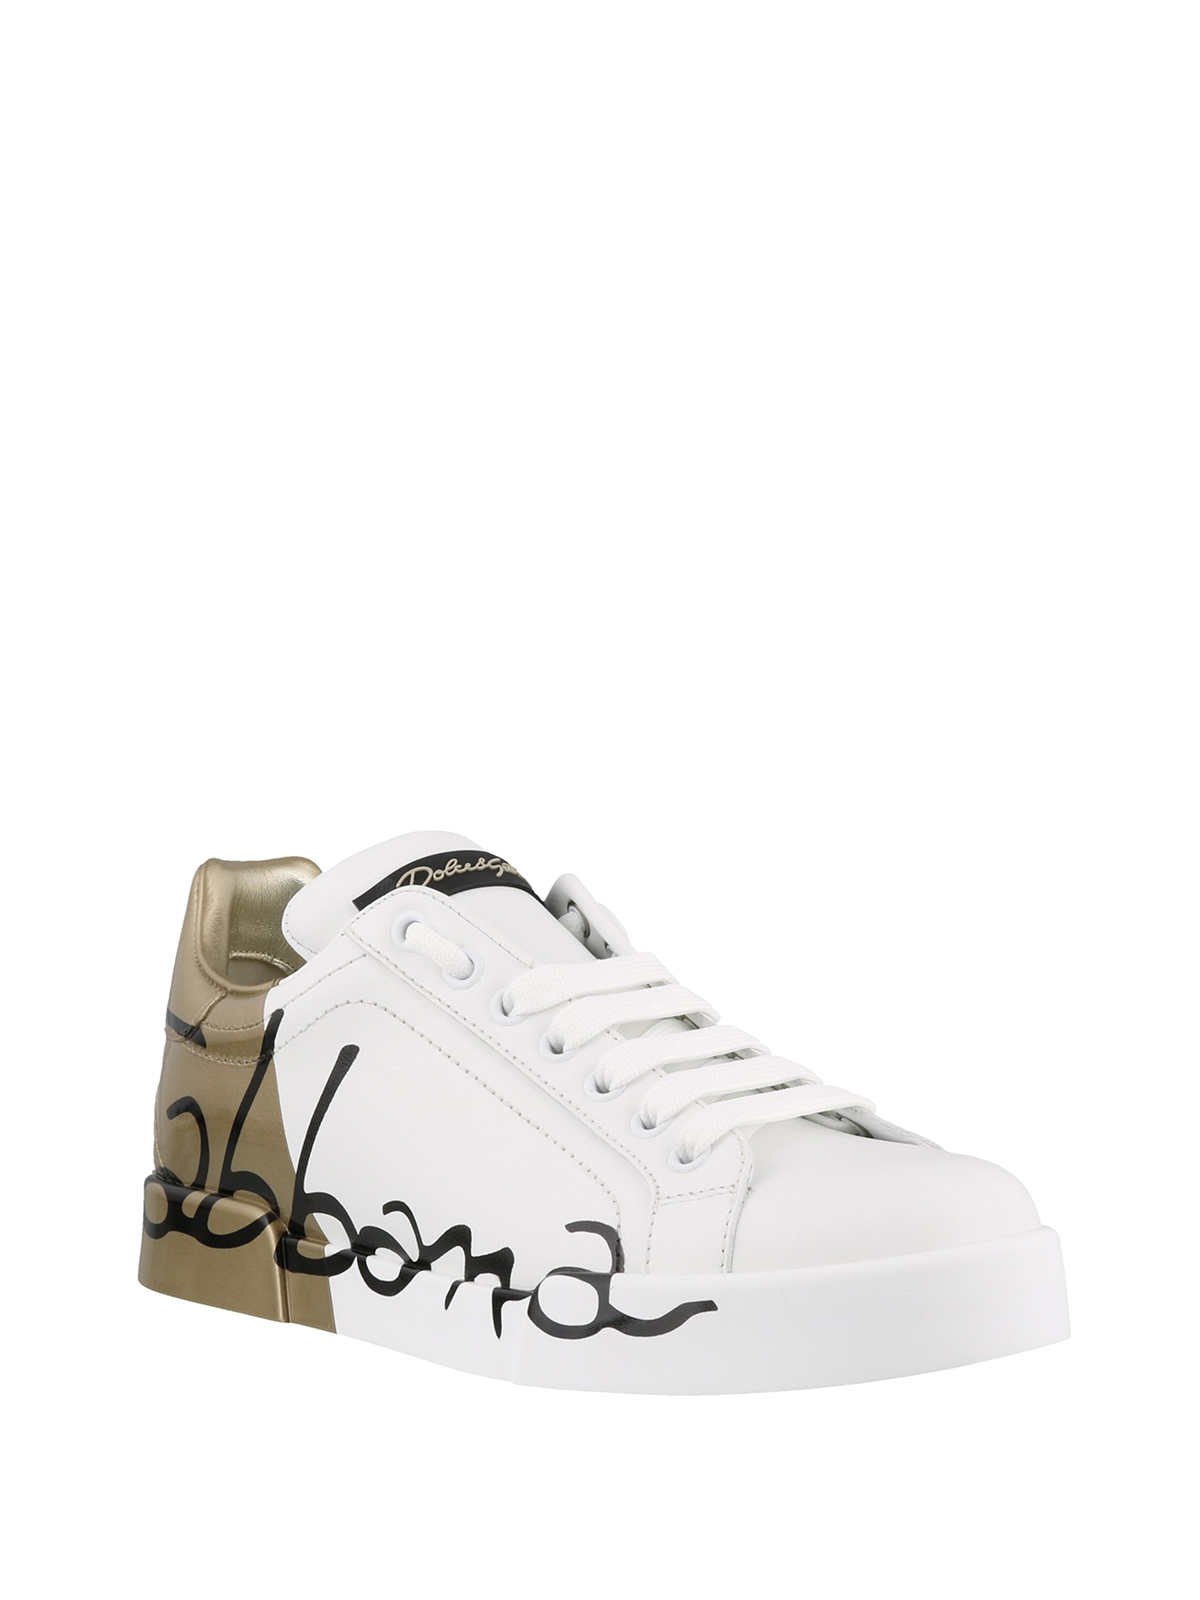 by Stat bunke Trainers Dolce & Gabbana - Portofino white and gold leather sneakers -  CK1600AI053HH821